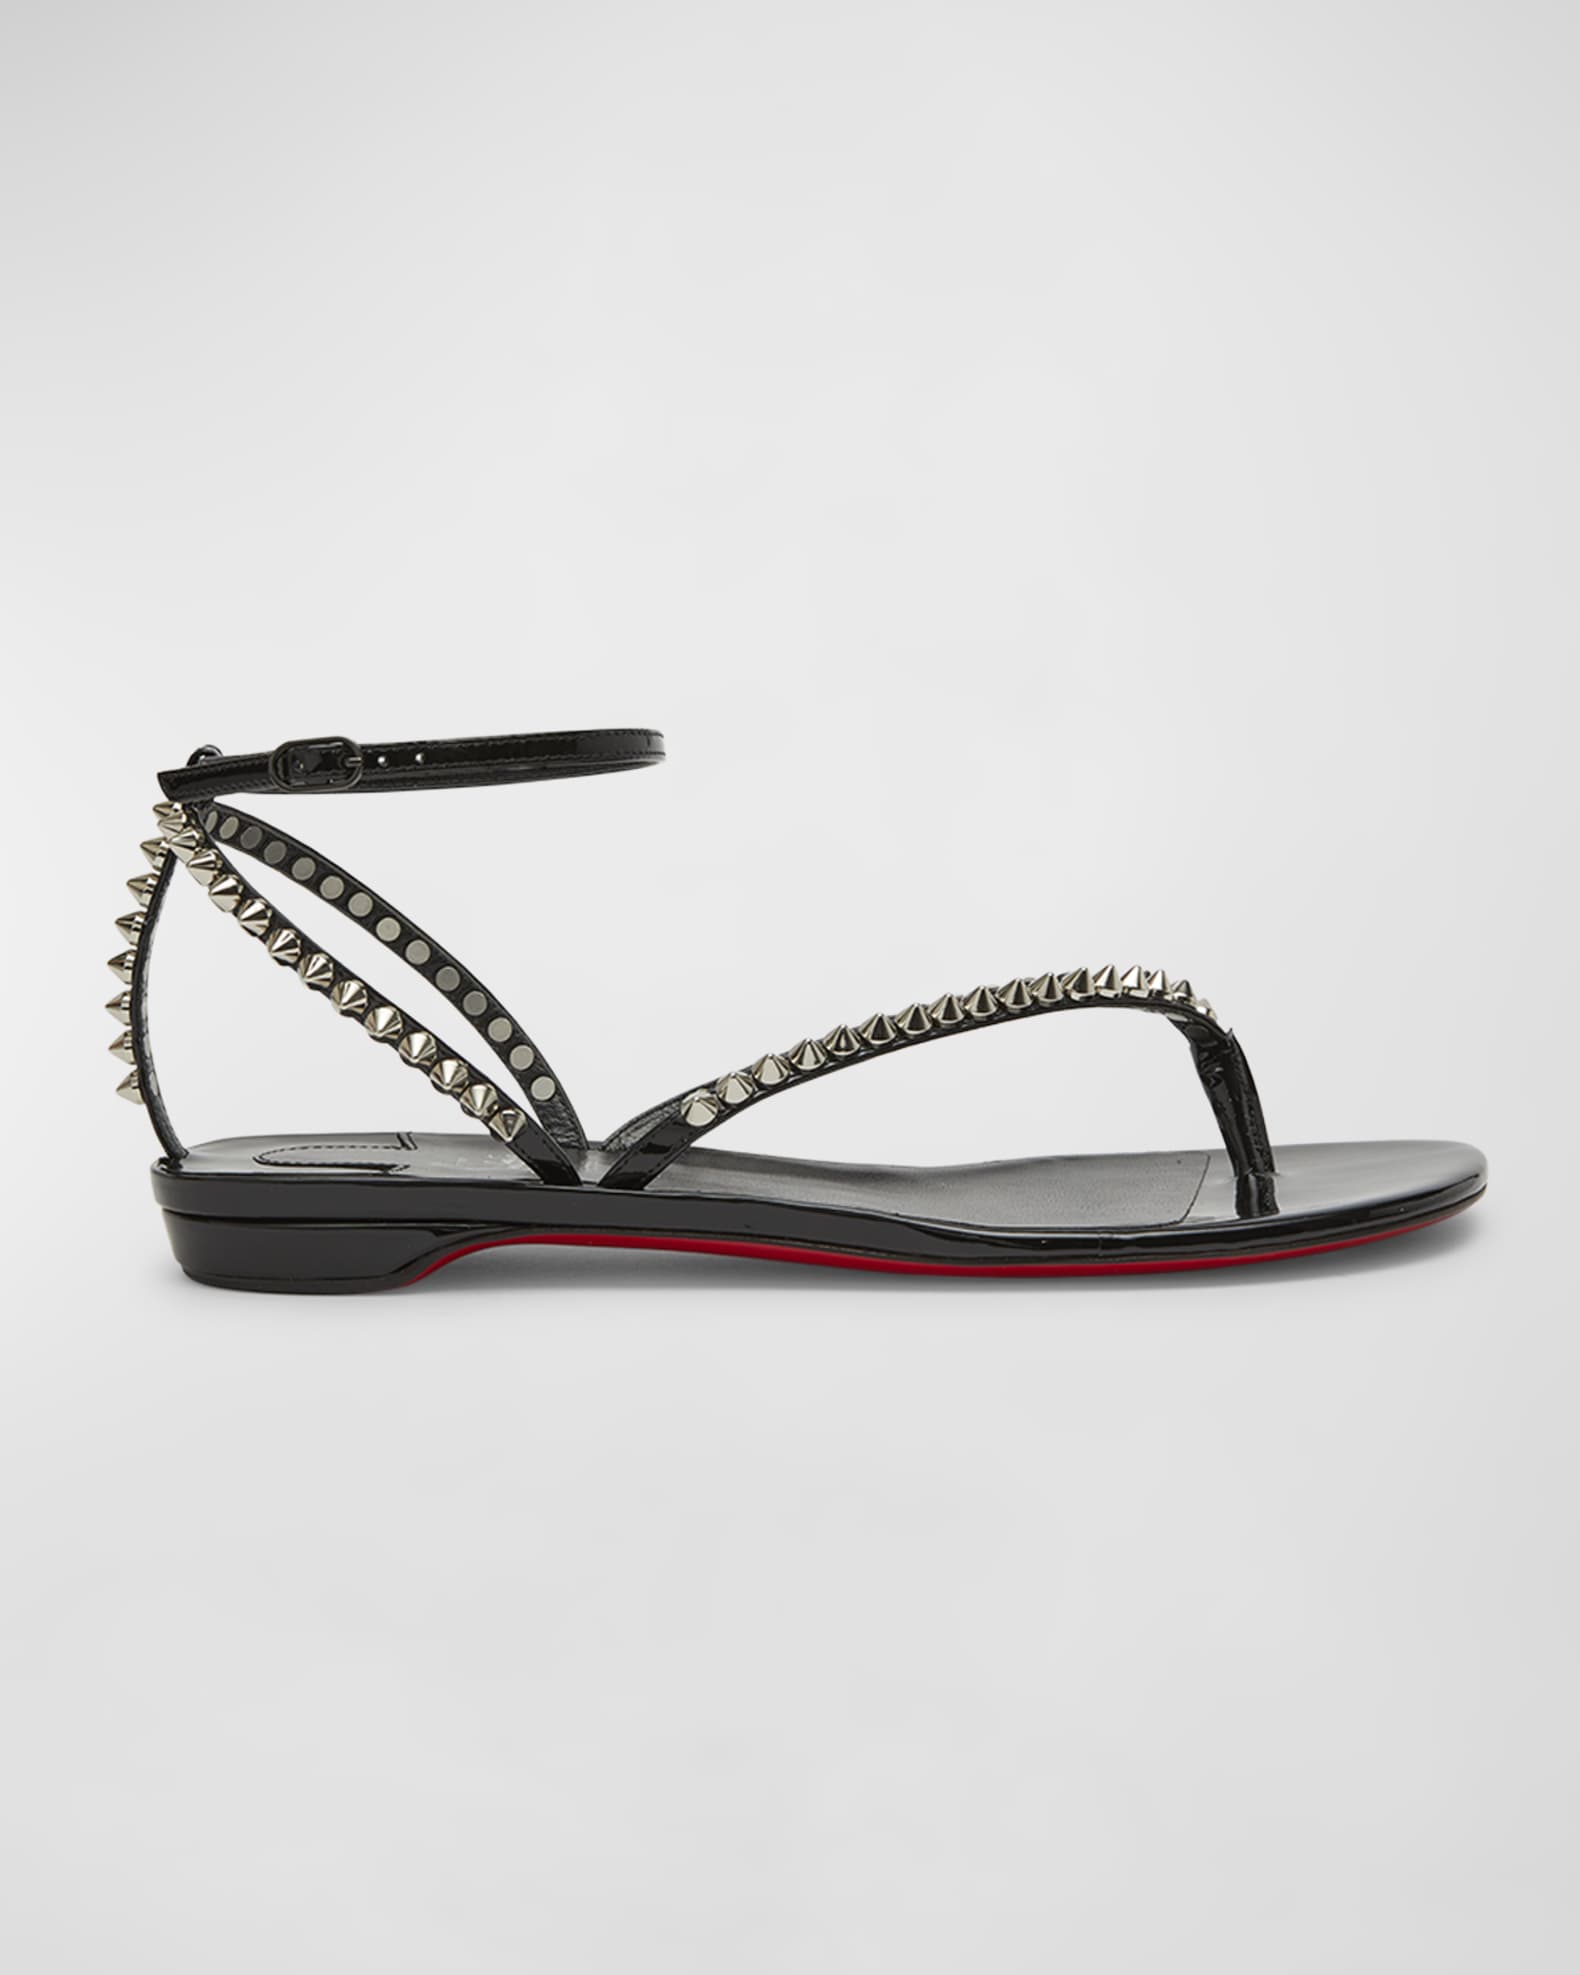 Christian Louboutin So Me 100 Spiked Leather Sandals - Women - Yellow Sandals - IT38